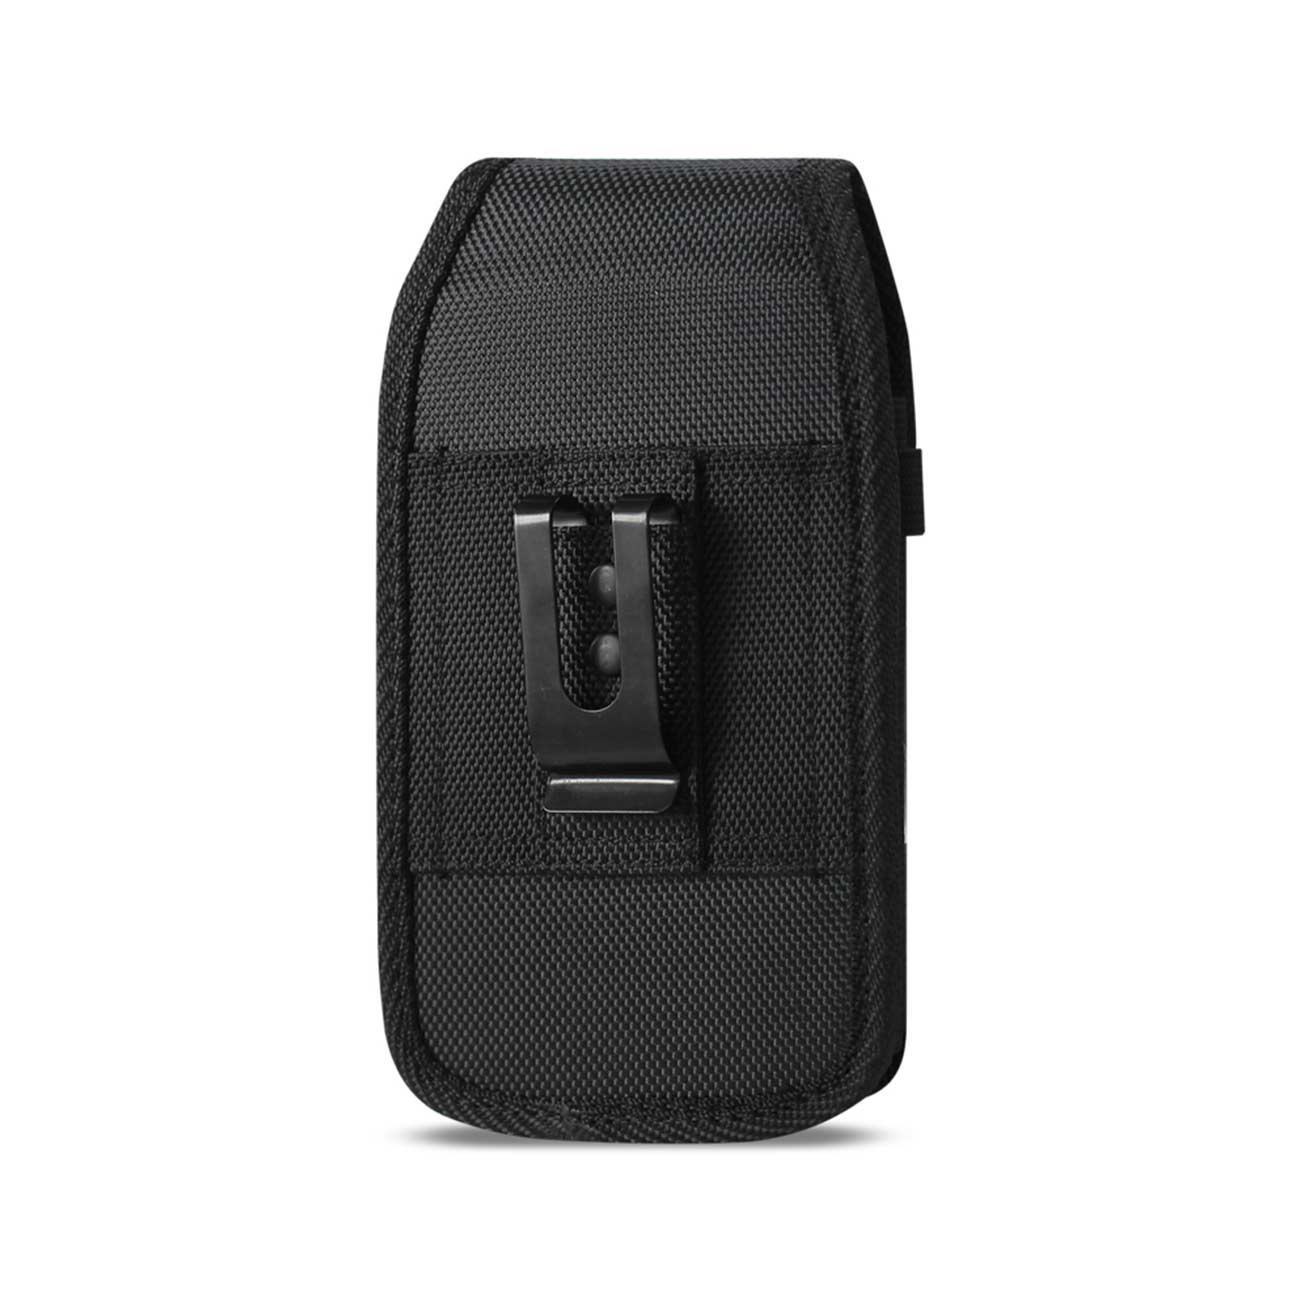 Vertical Rugged Pouch/Phone Holster With Zipper Pocket Black In Cardboard Packaging